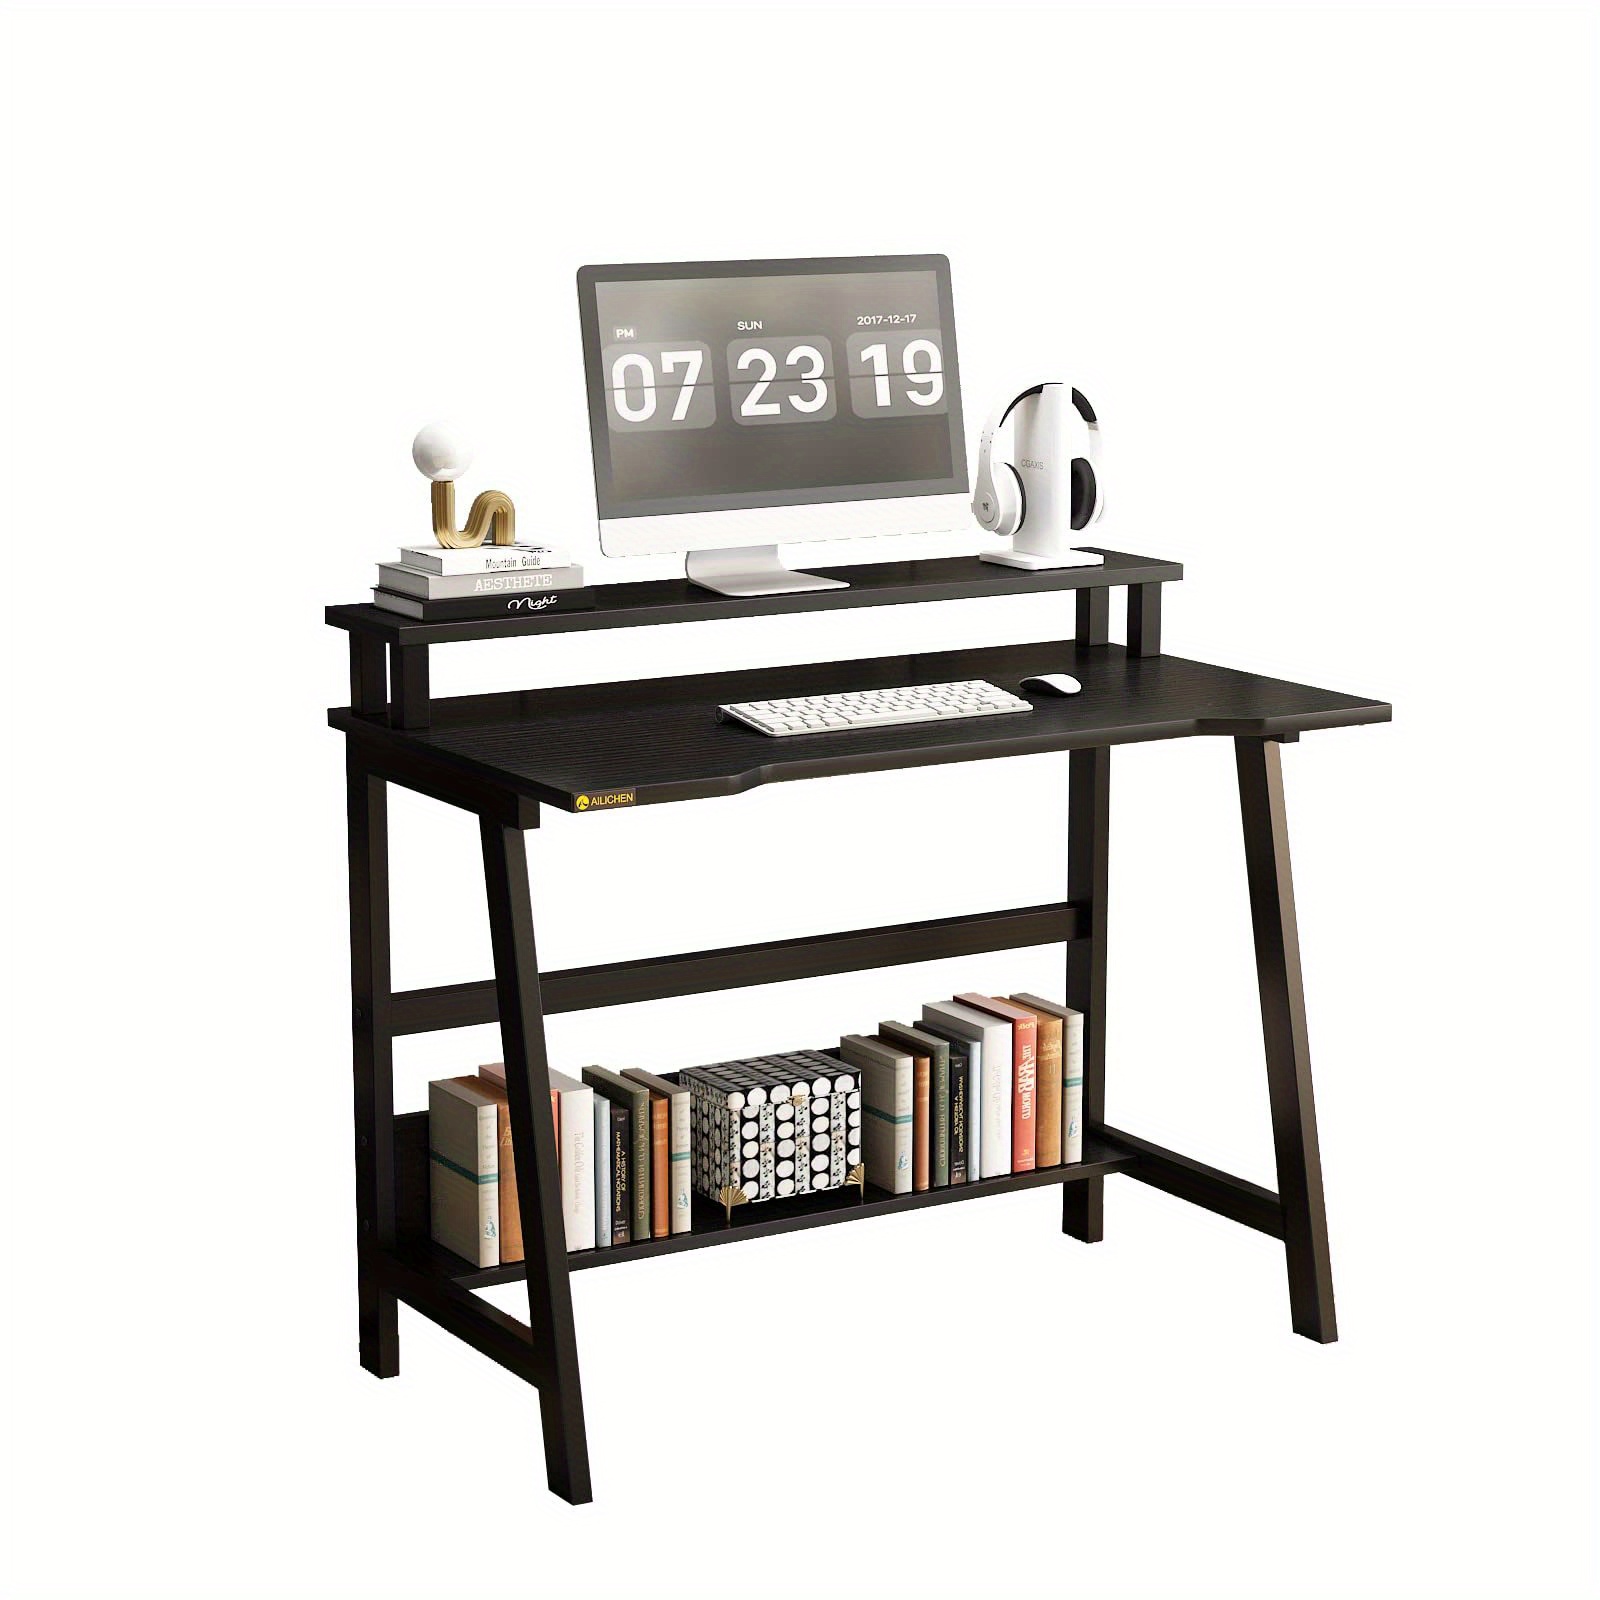 

Office Desk Small Computer Desk 31.5 Inch Writing Study Work Desk With Storage Monitor Stand Wooden Desk For Small Spaces Modern Simple Style Home Bedroom Table